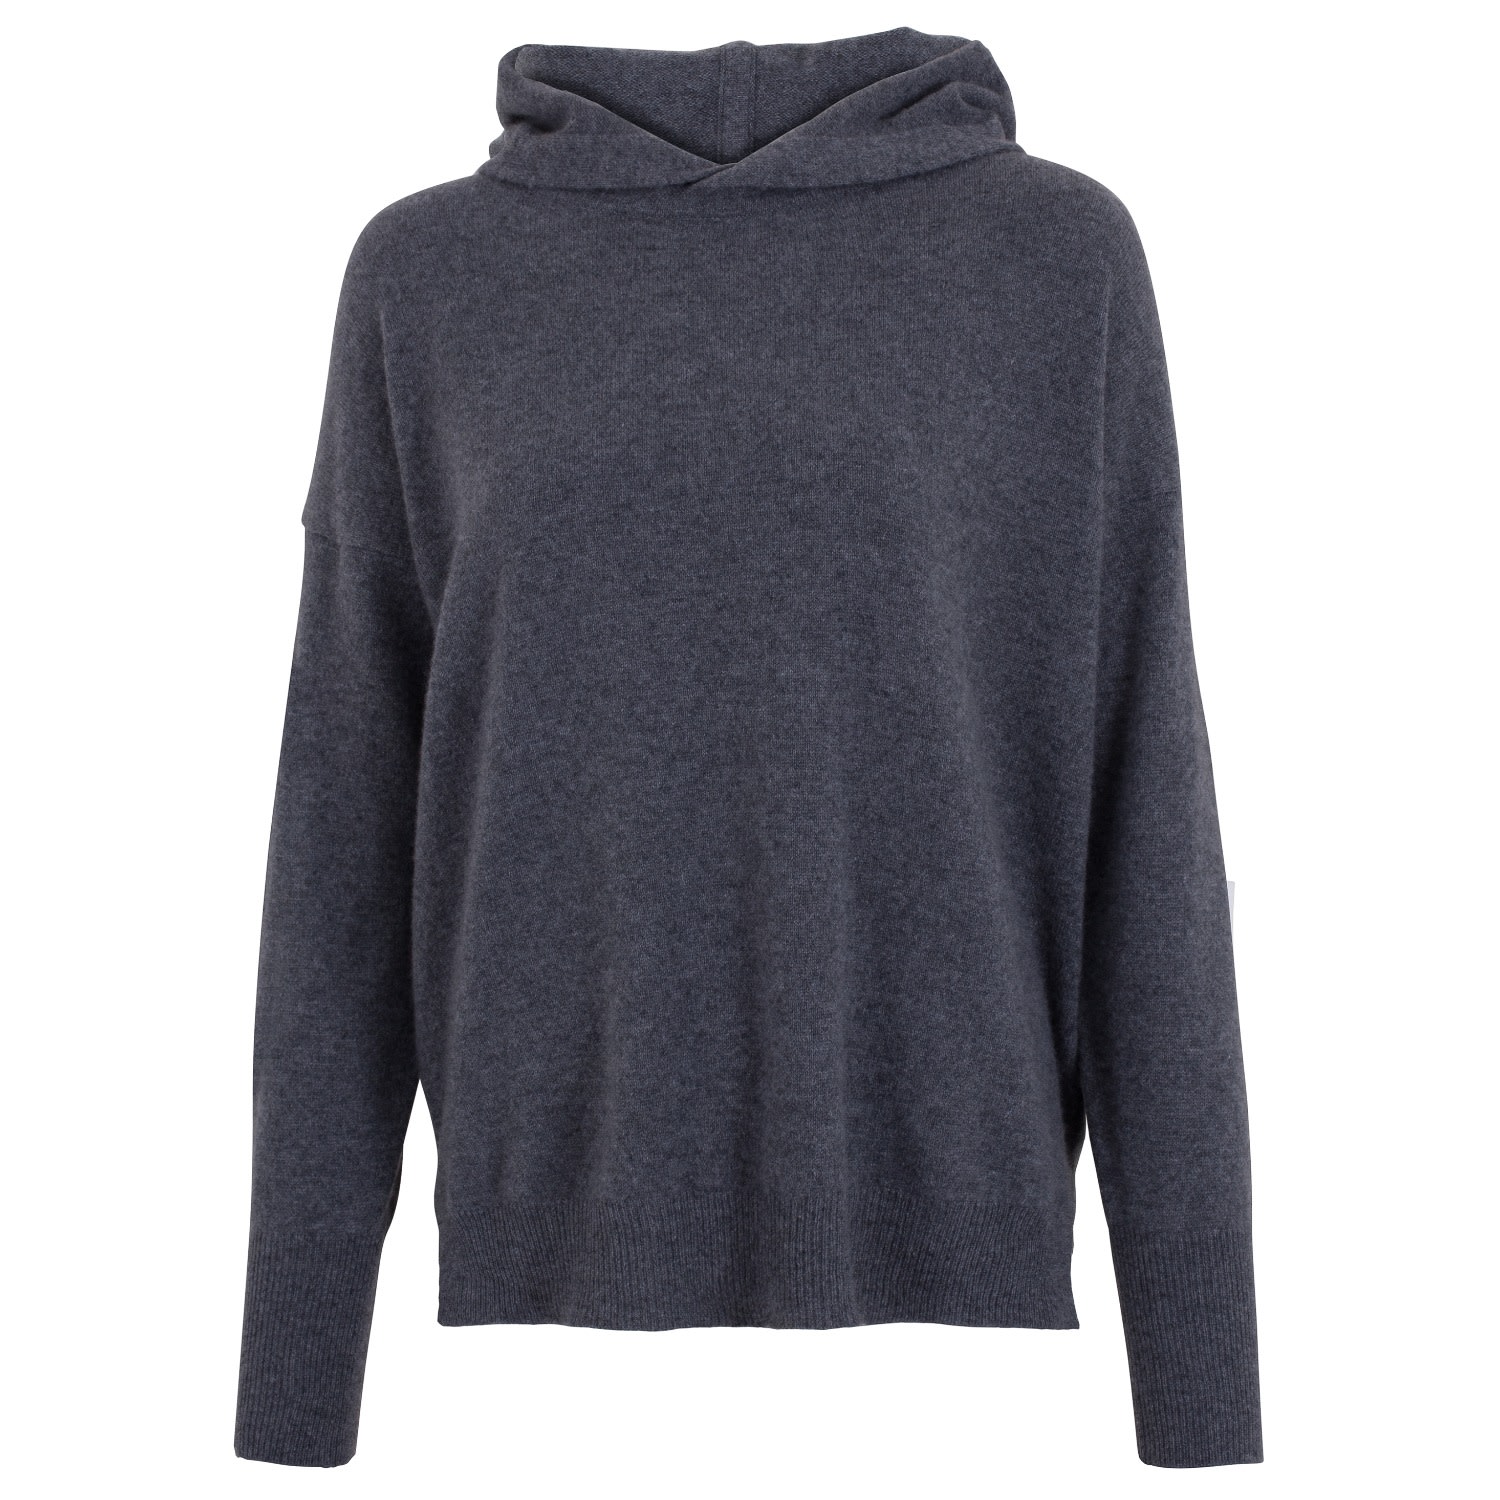 Paul James Knitwear Womens Cashmere Hooded Mayra Jumper - Grey